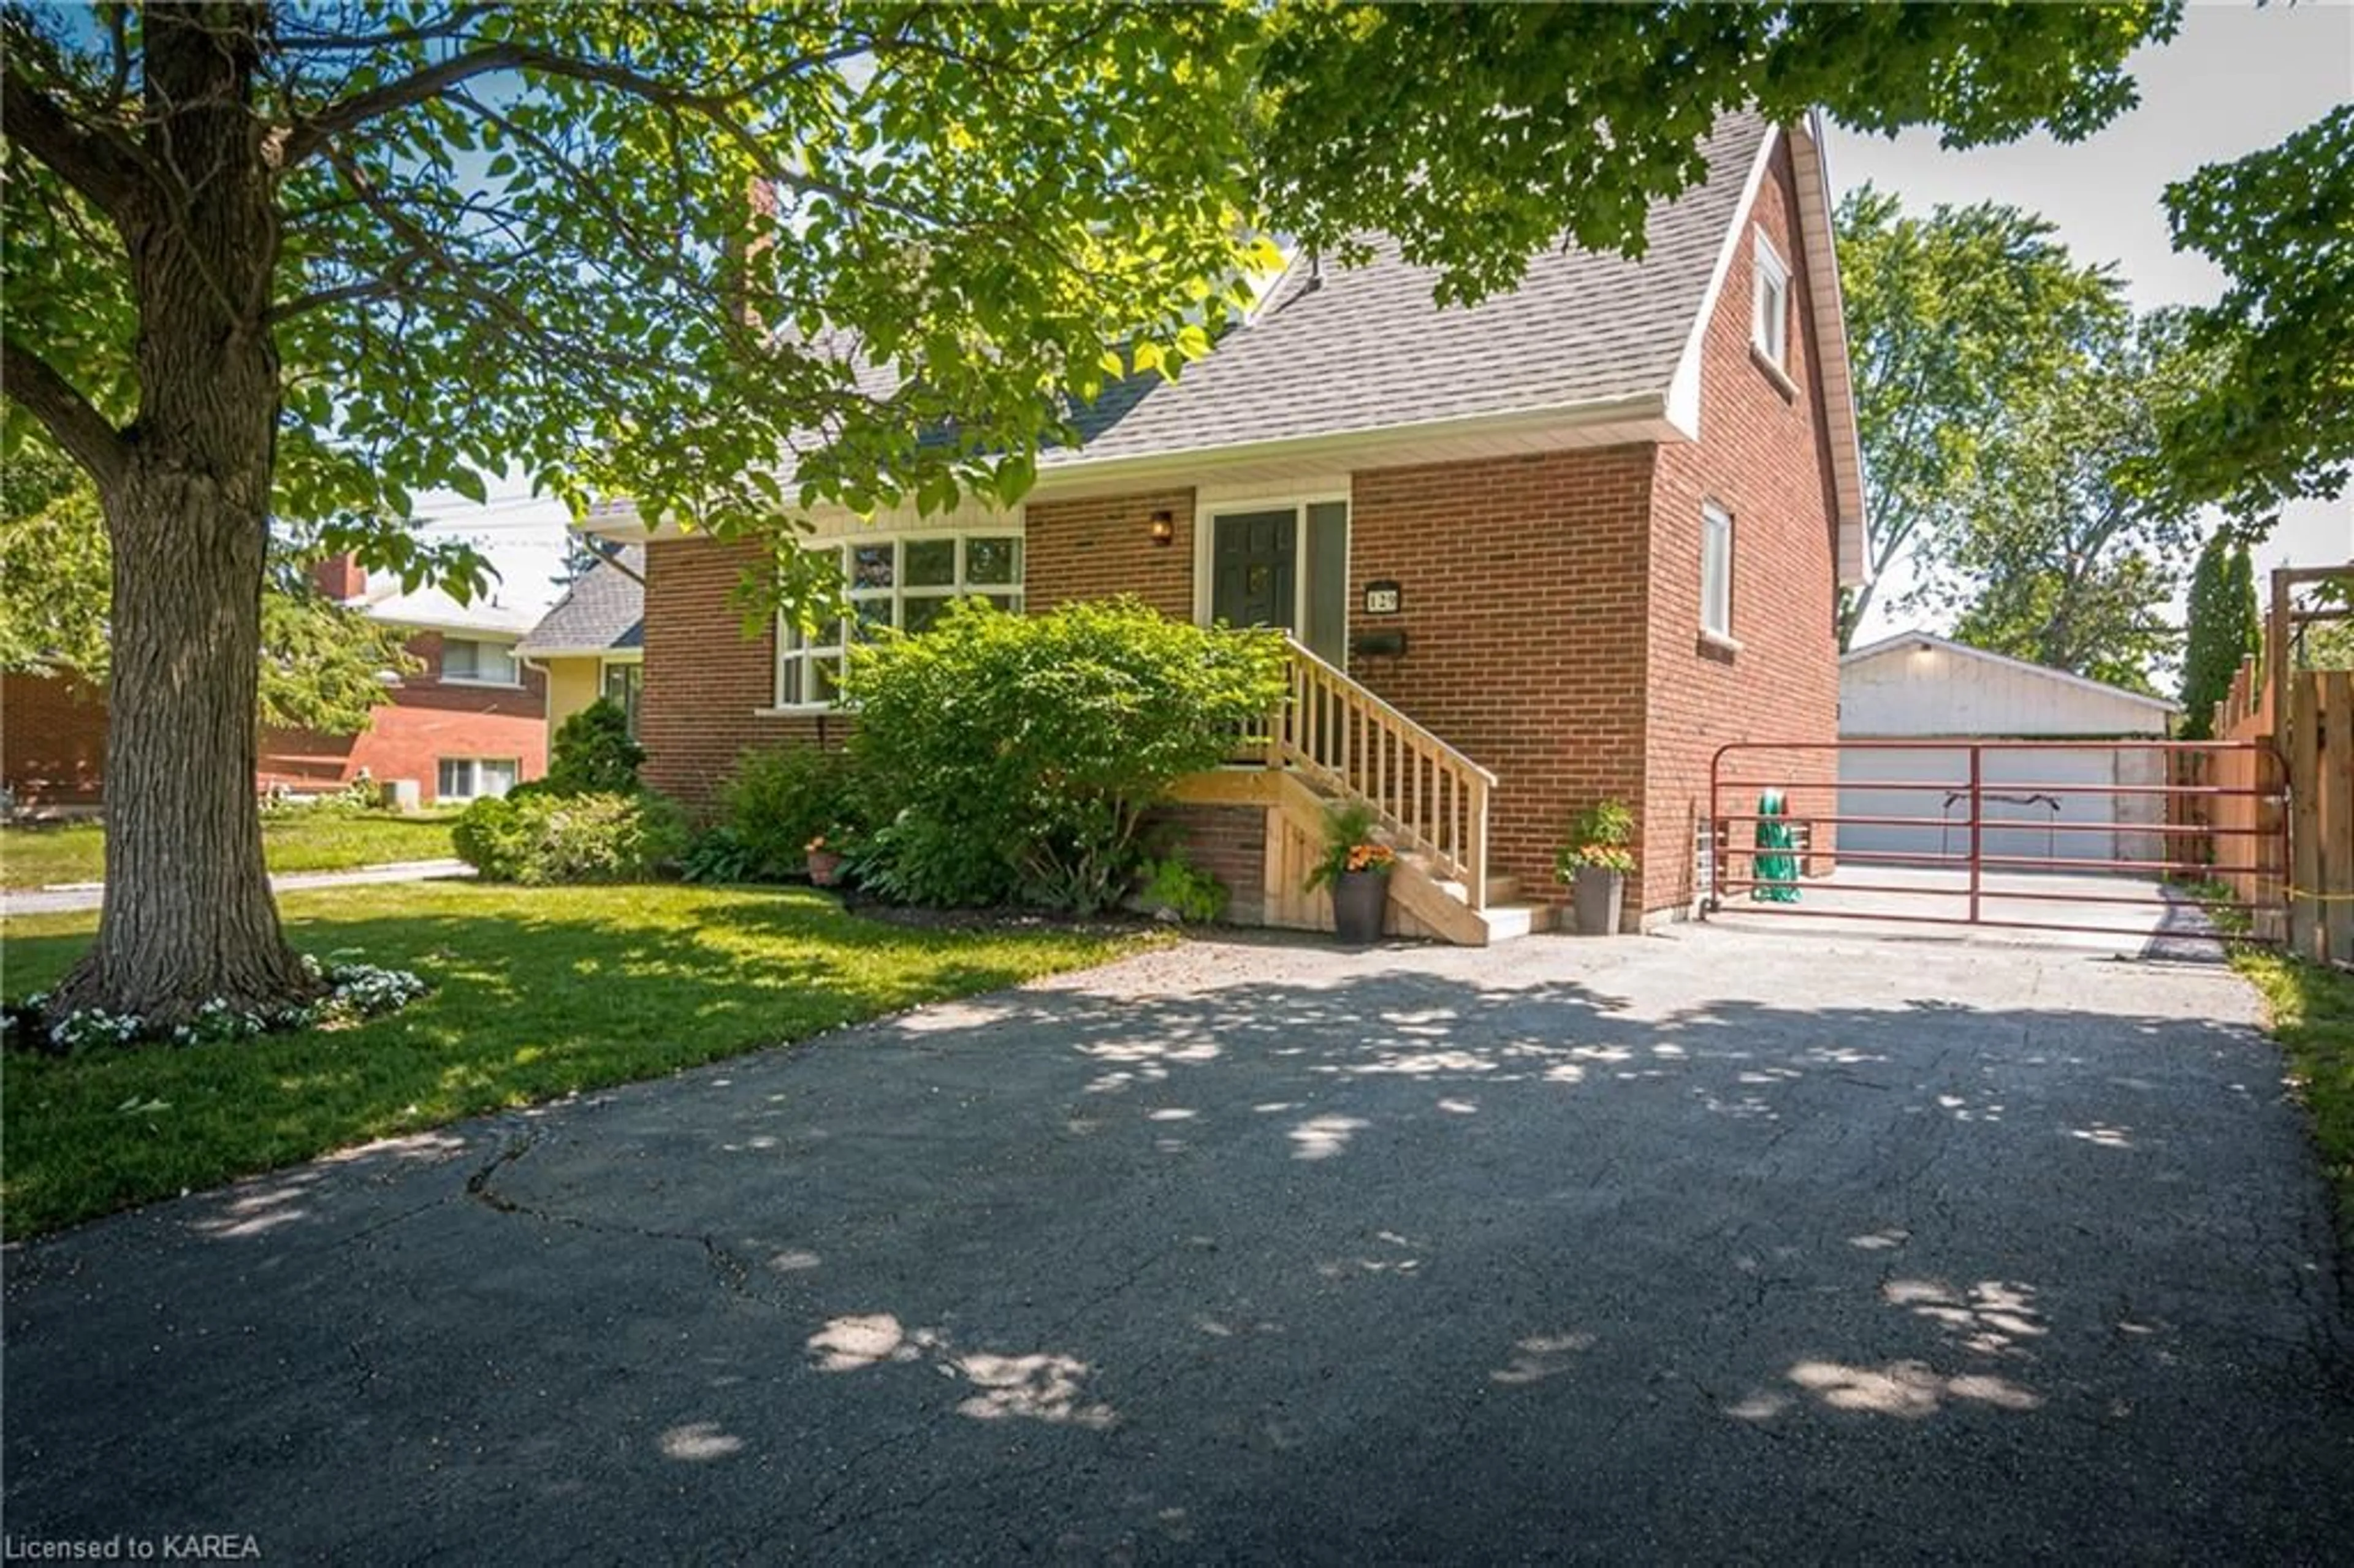 Home with brick exterior material for 129 Wiley St, Kingston Ontario K7K 5B6